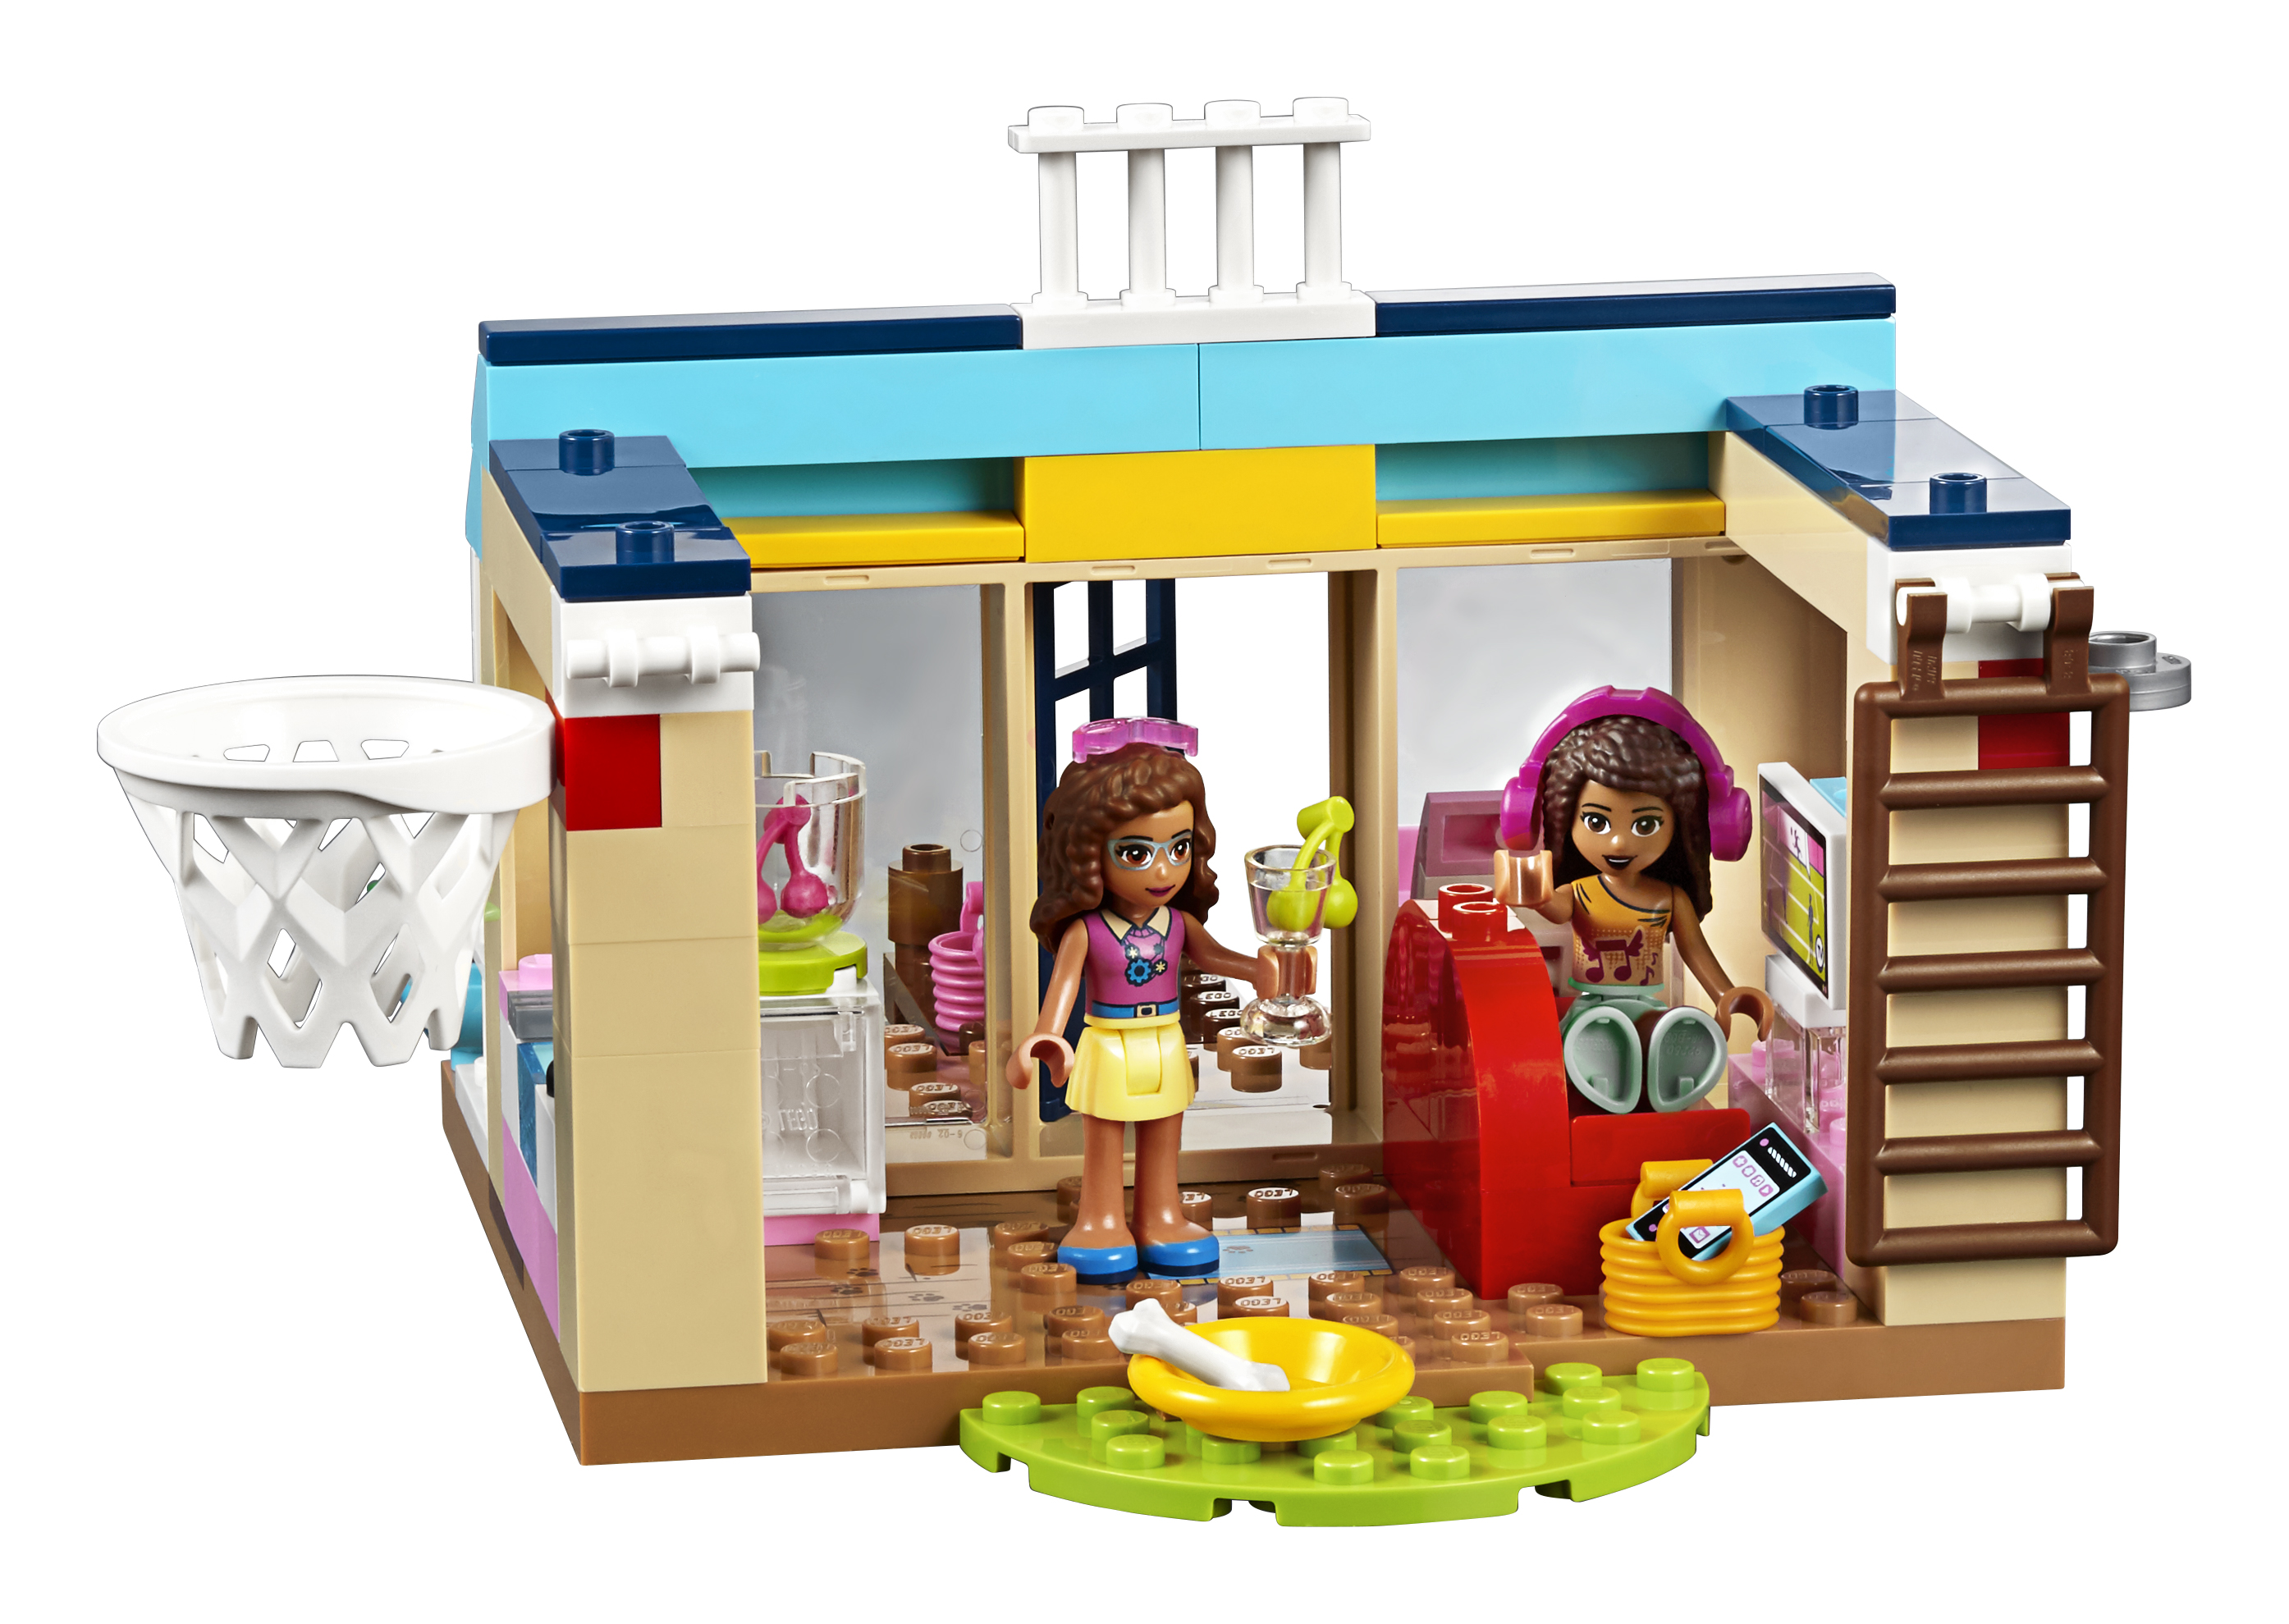 LEGO Juniors Stephanie's Lakeside House 10763 (215 Pieces) - image 5 of 6